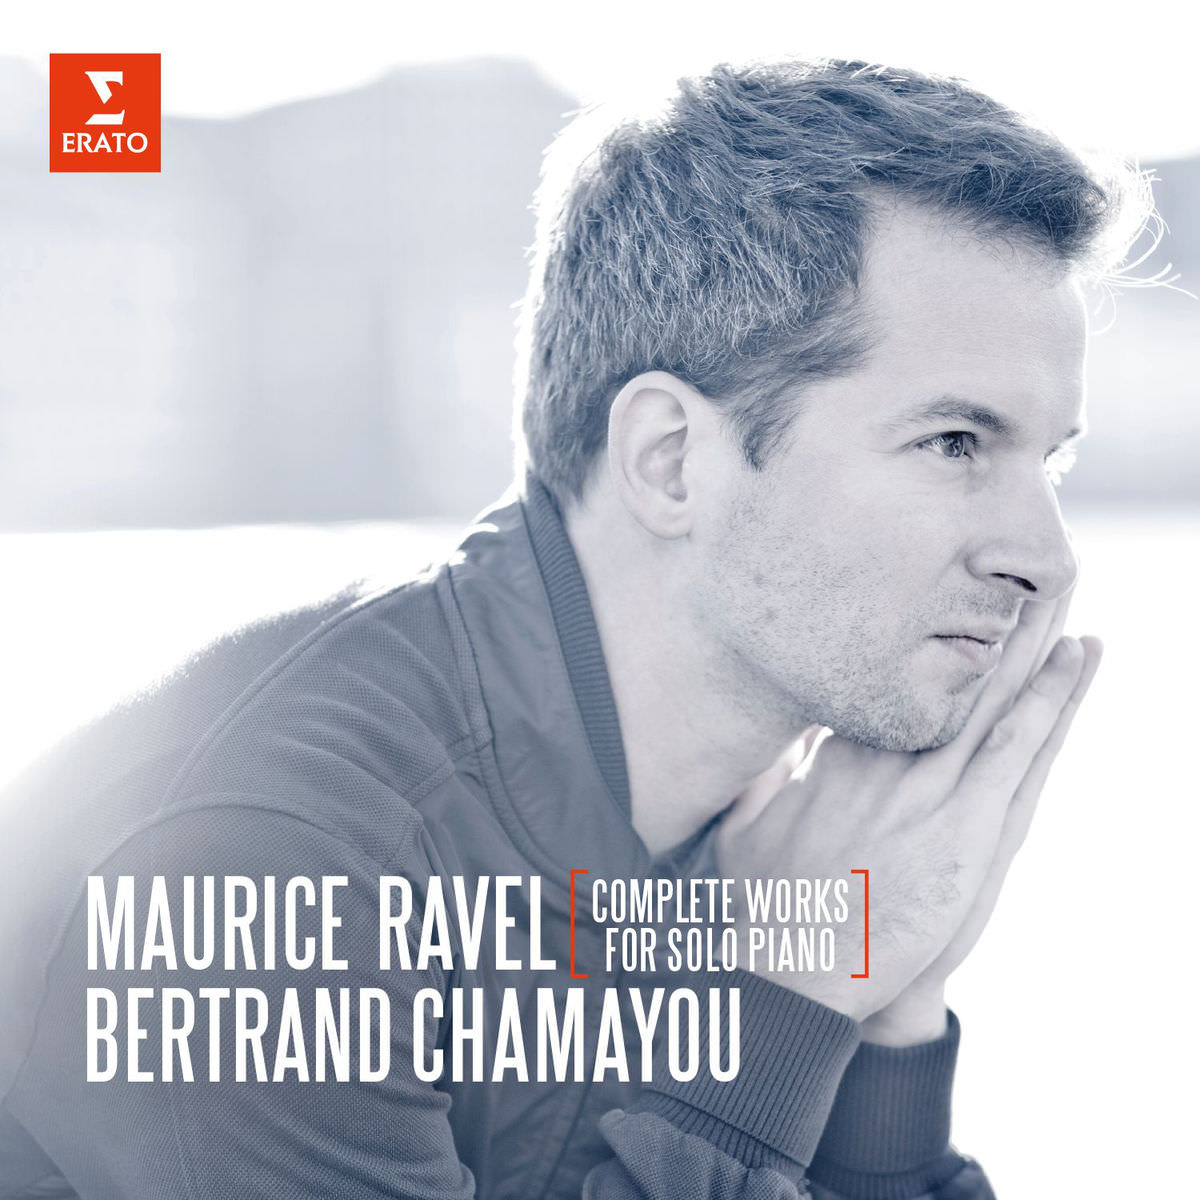 Bertrand Chamayou - Ravel: Complete Works for Solo Piano (2016) [Qobuz FLAC 24bit/96kHz]